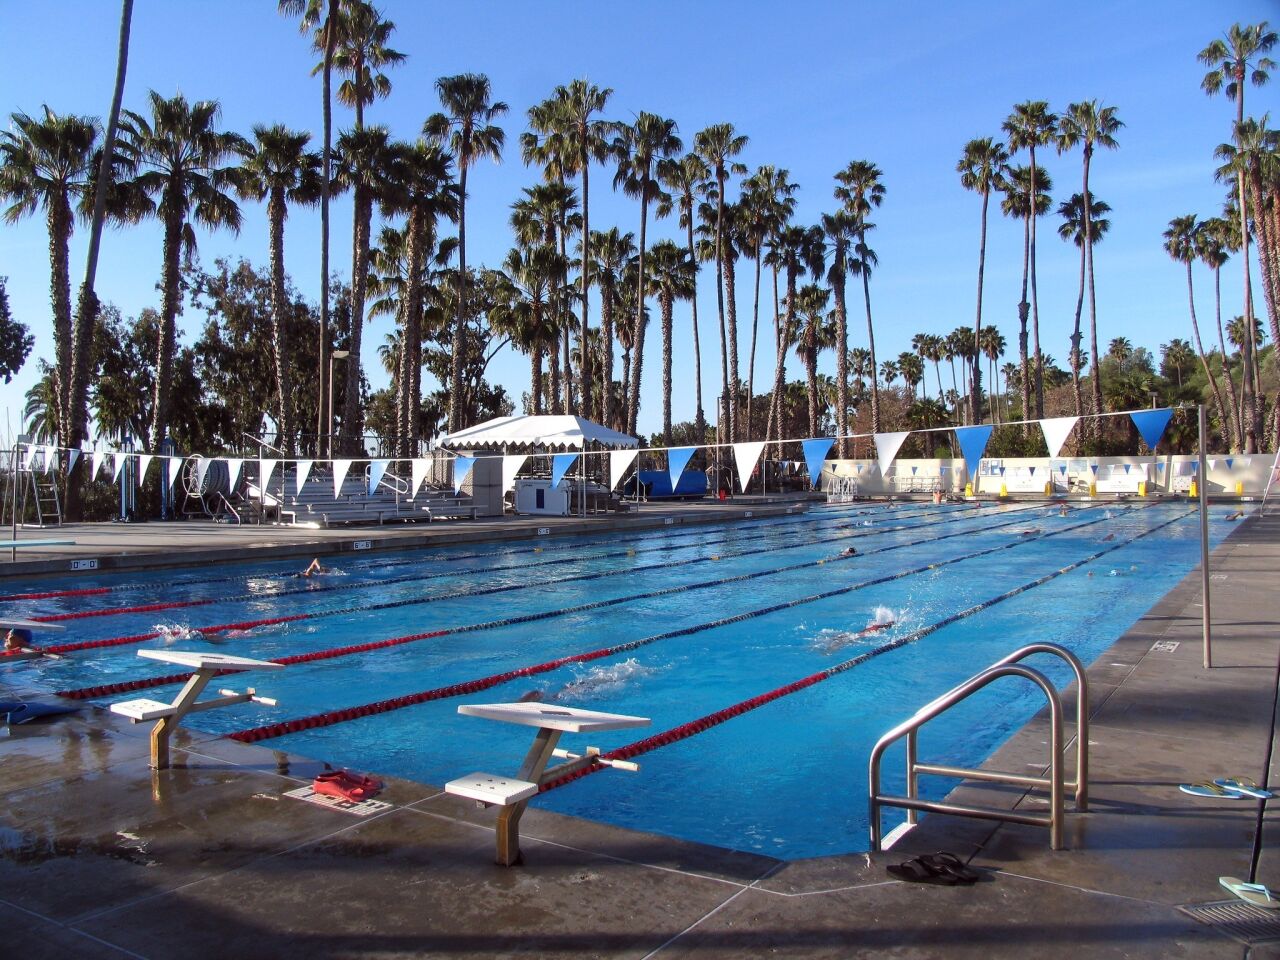 Love to do laps? When in Santa Barbara, put on your goggles and take your mark at Los Banos del Mar, fringed by tall palm trees on the ocean at West Beach. Los Banos is 50 meters long with seven lanes, so it never feels crowded.